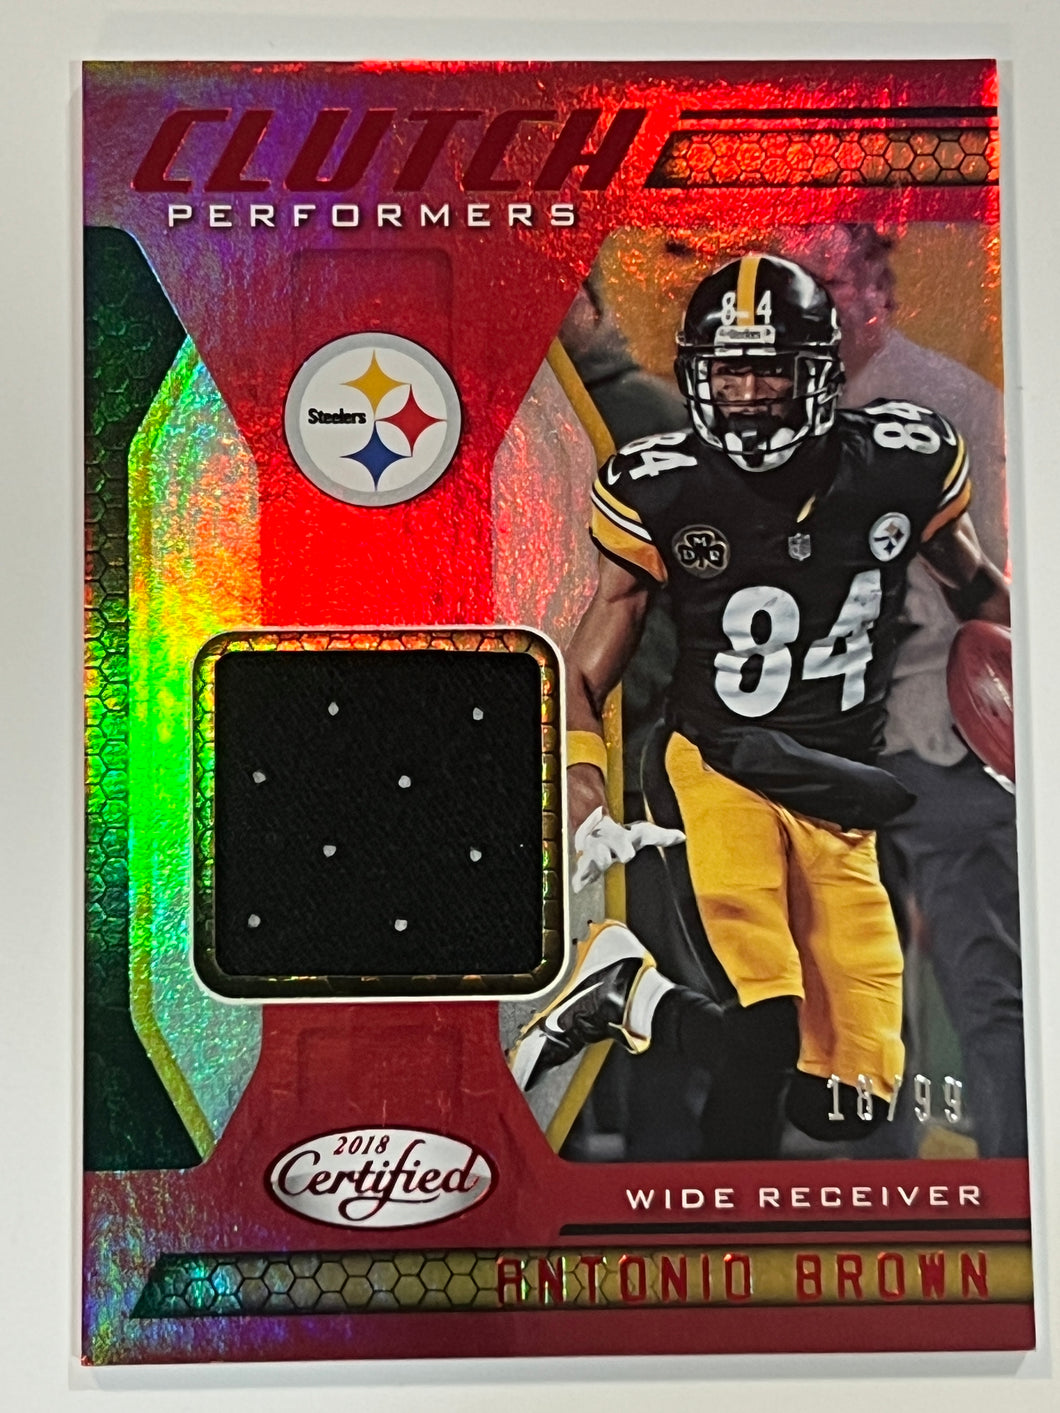 2018 Panini Certified Clutch Performers Red Antonio Brown Steelers Jersey /99